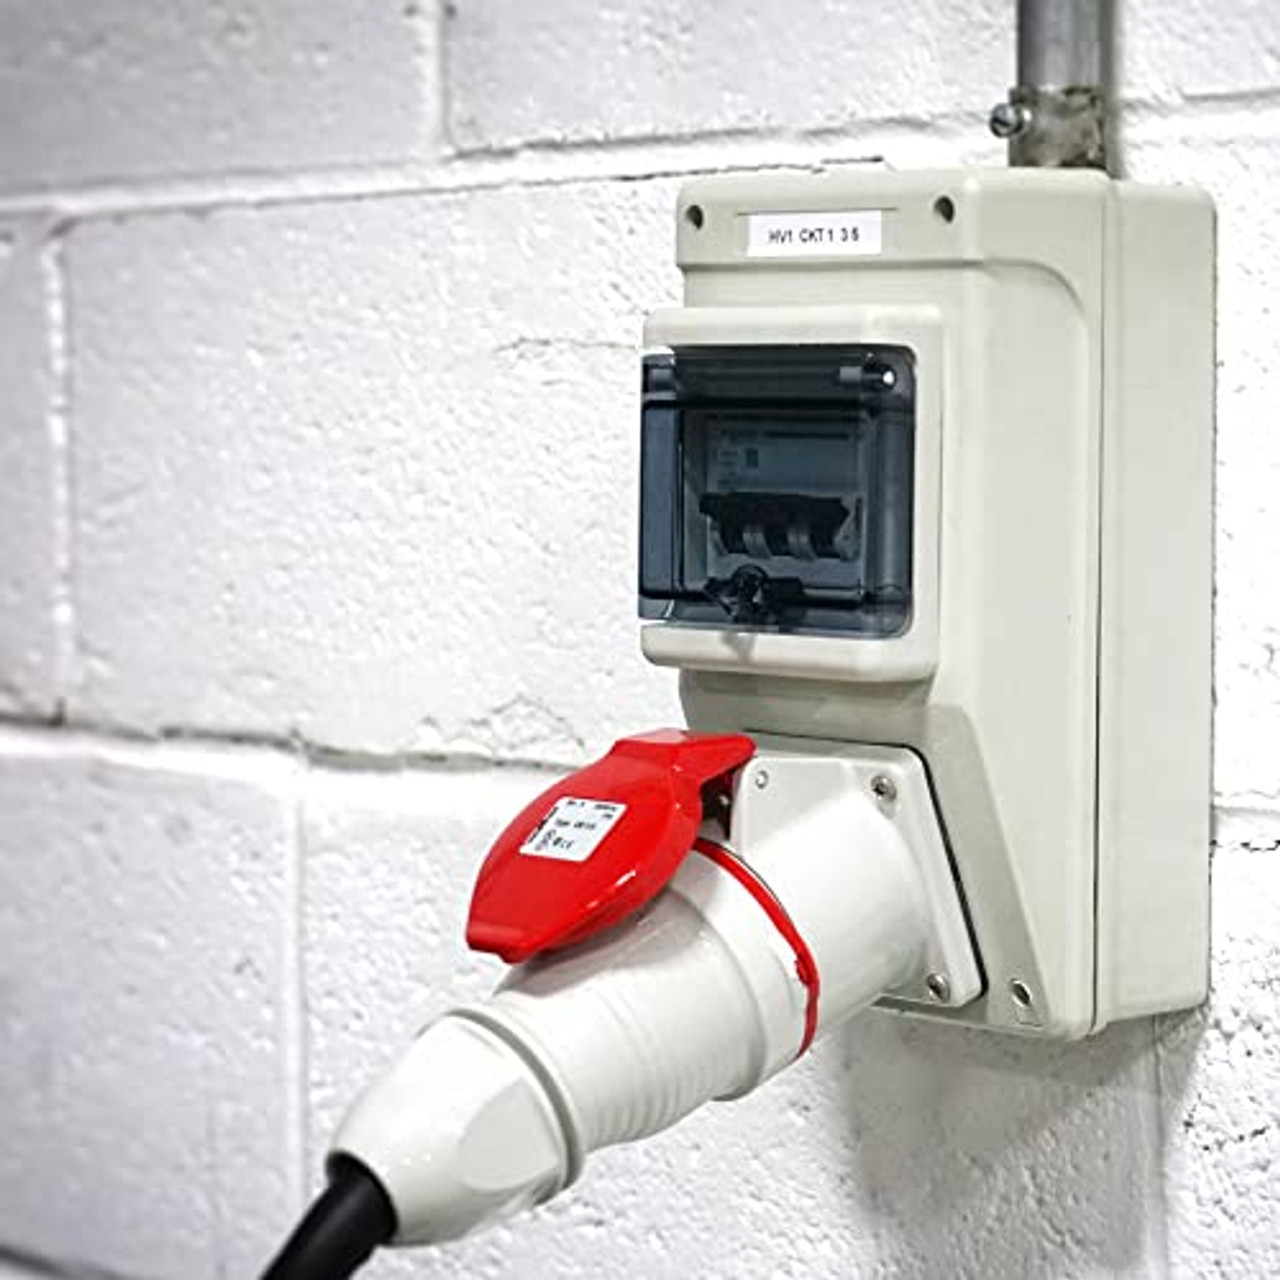 Example of IEC 60309 plugs and connectors used in warehouses